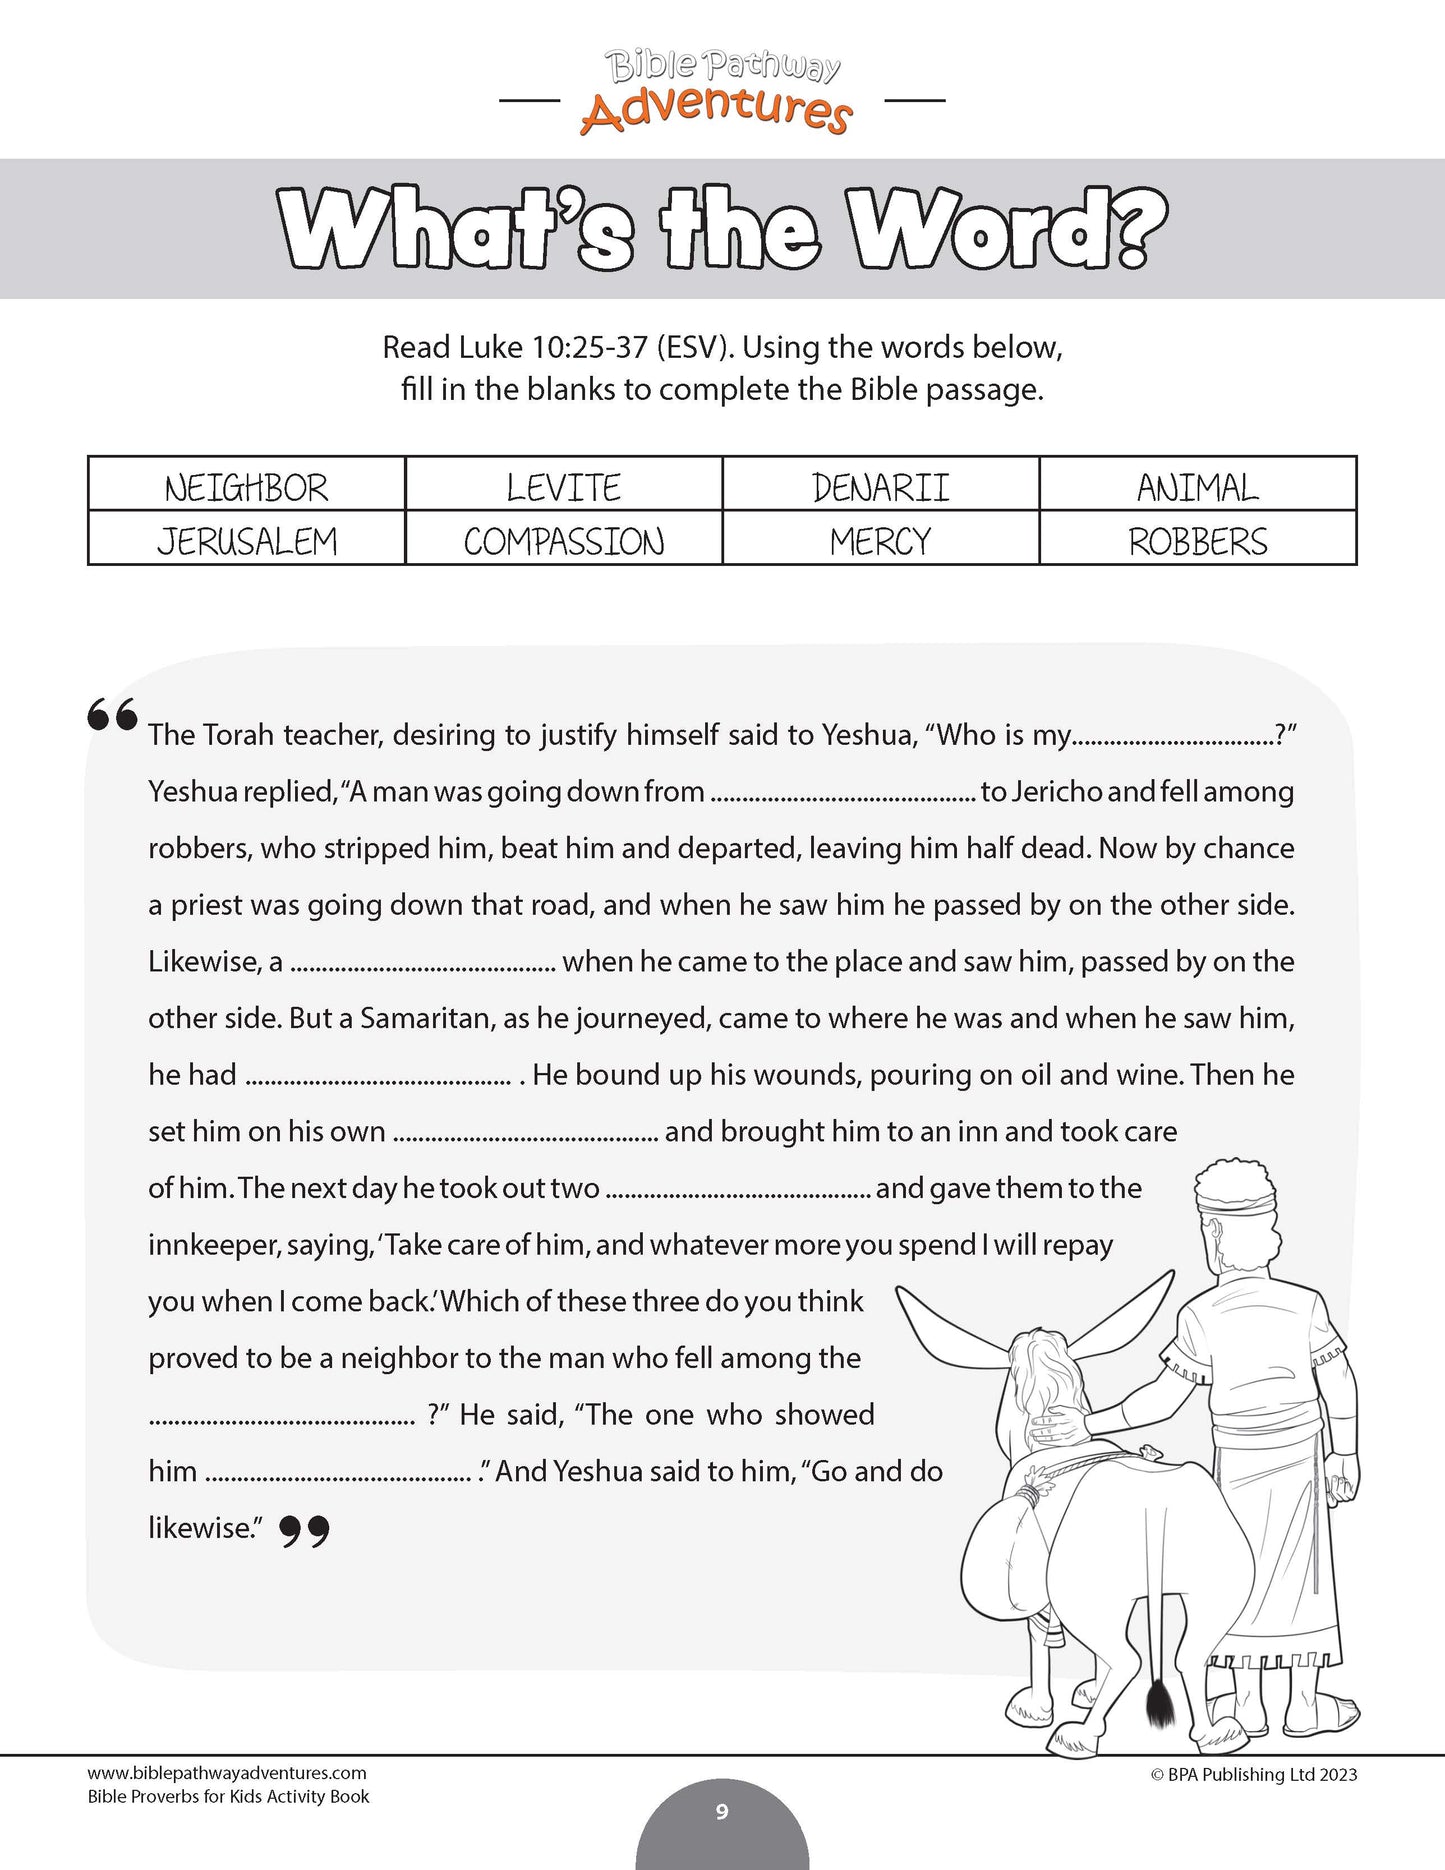 Kindness: Bible Activity Book for Kids (PDF)